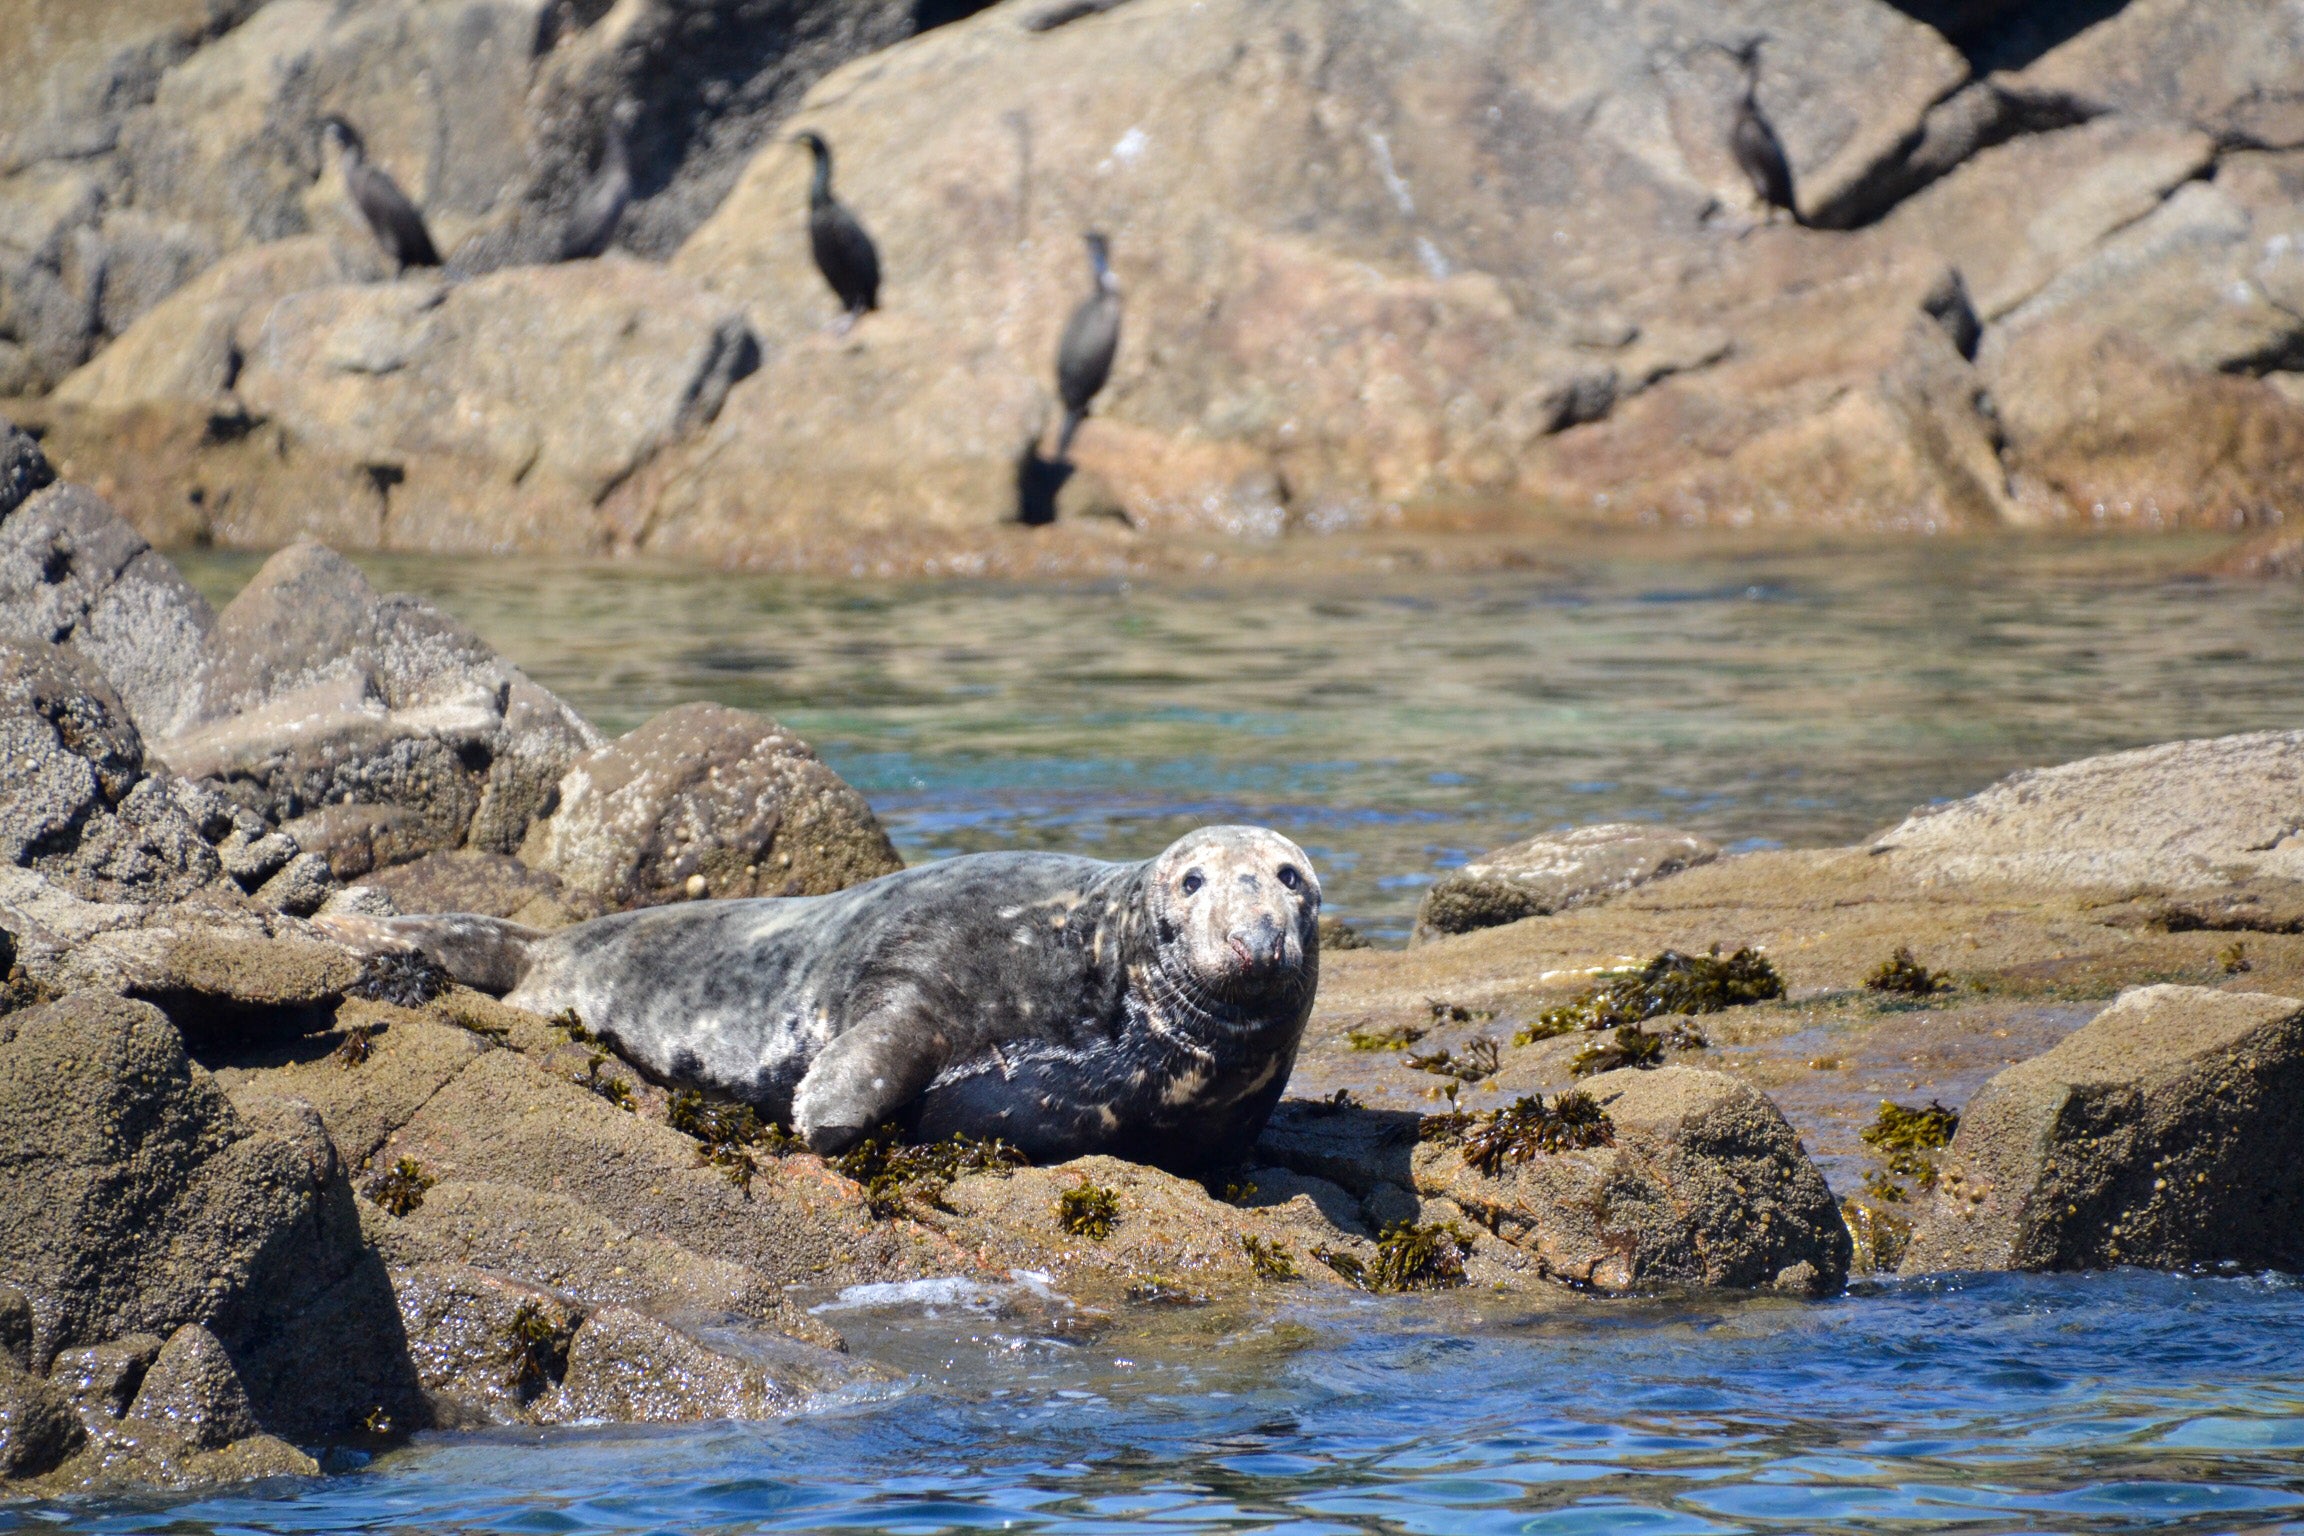 Go seal spotting on Scilly